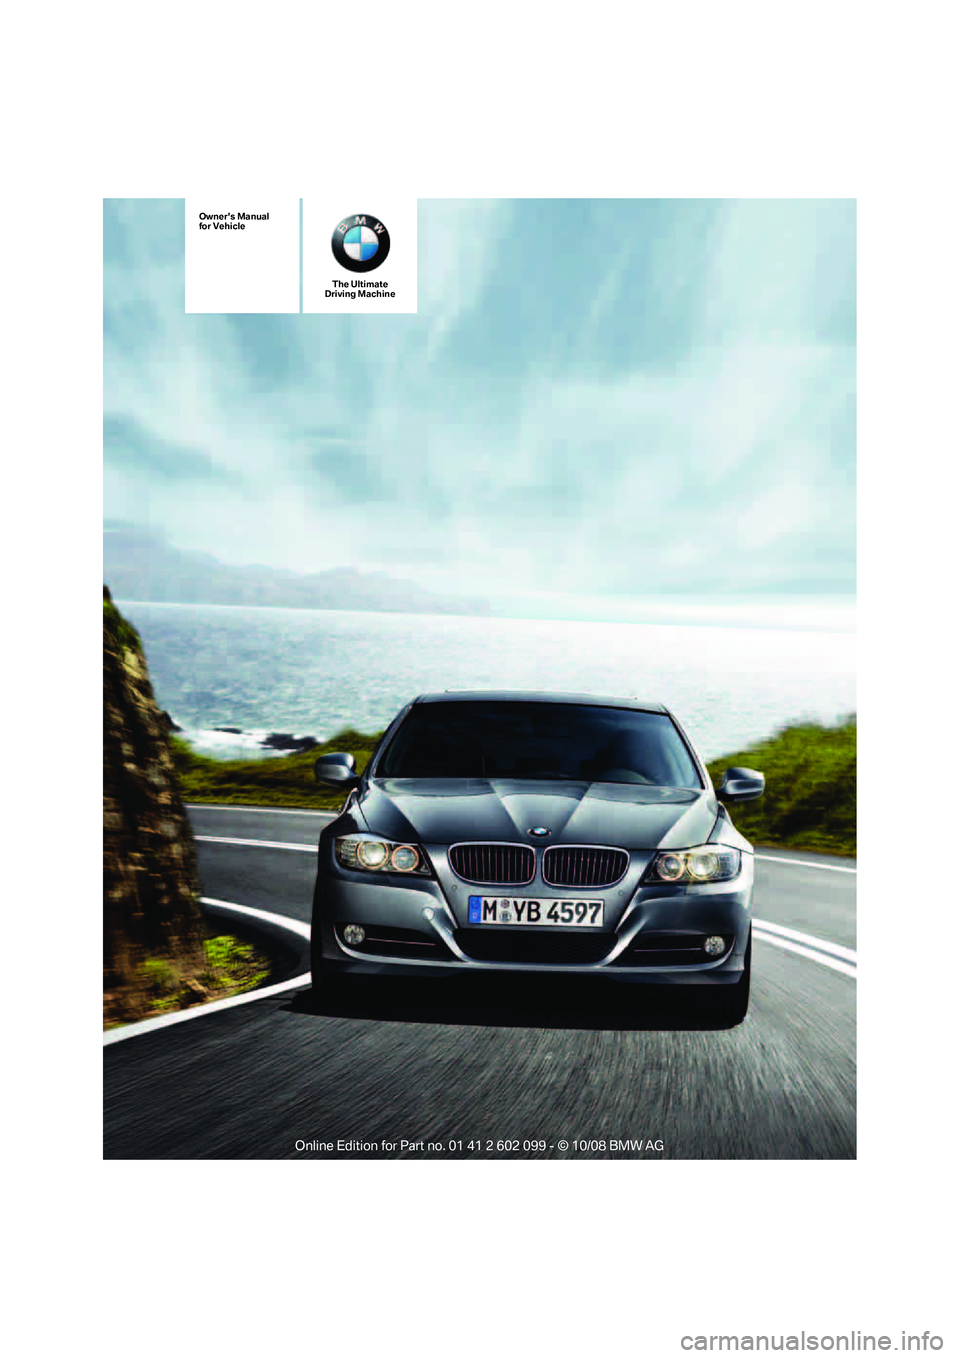 BMW 3 SERIES 2009  Owners Manual The Ultimate
Driving Machine
Owners Manual
for Vehicle
ba8_E9091_cic.book  Seite 1  Mittwoch, 29. Oktober 2008  2:59 14 